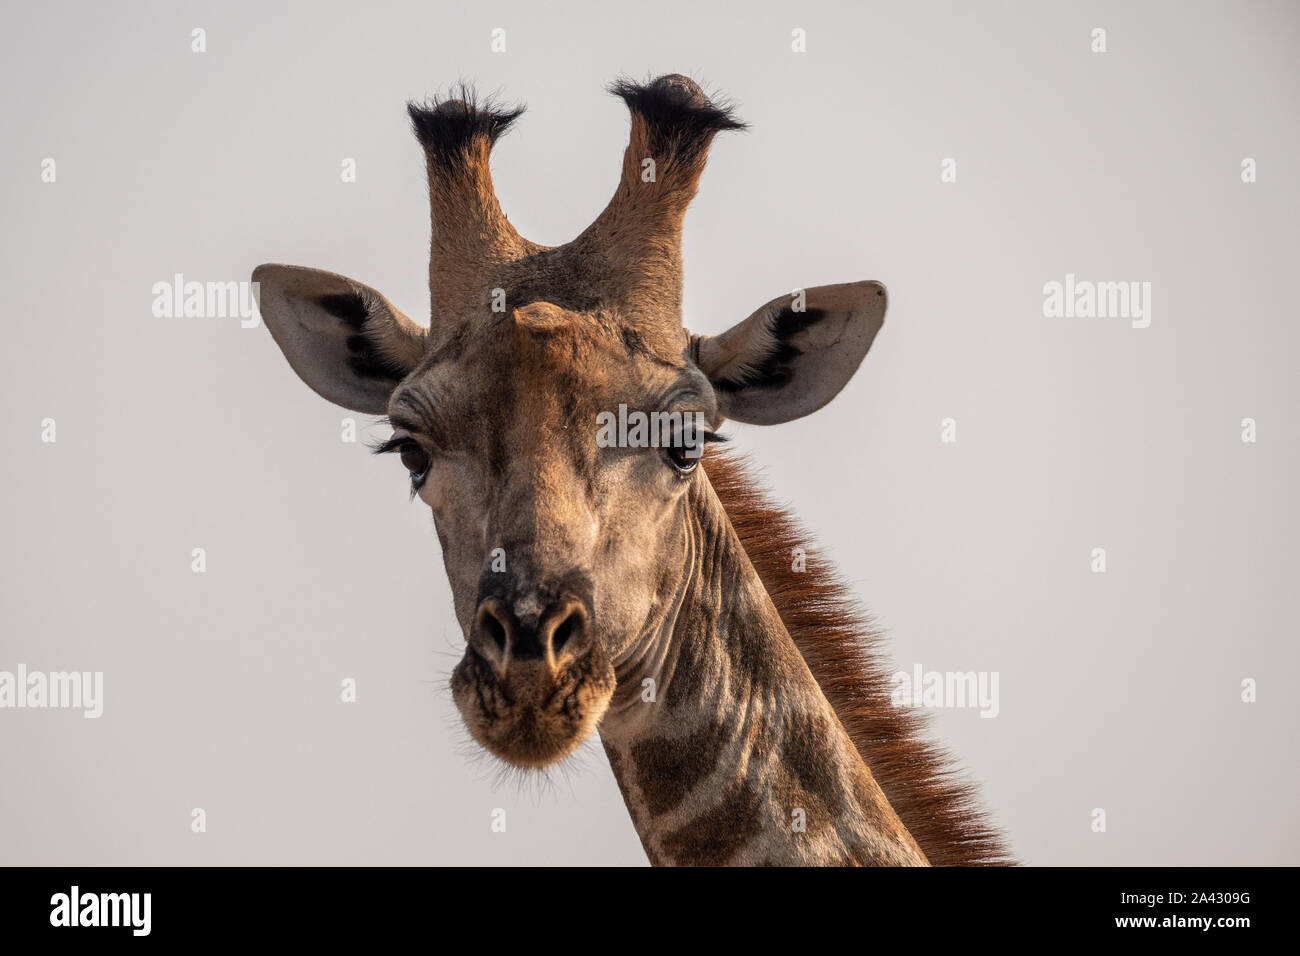 Close-Up Head of a Male Giraffe, Isolated in Moremi Game Reserve, Botswana Stock Photo